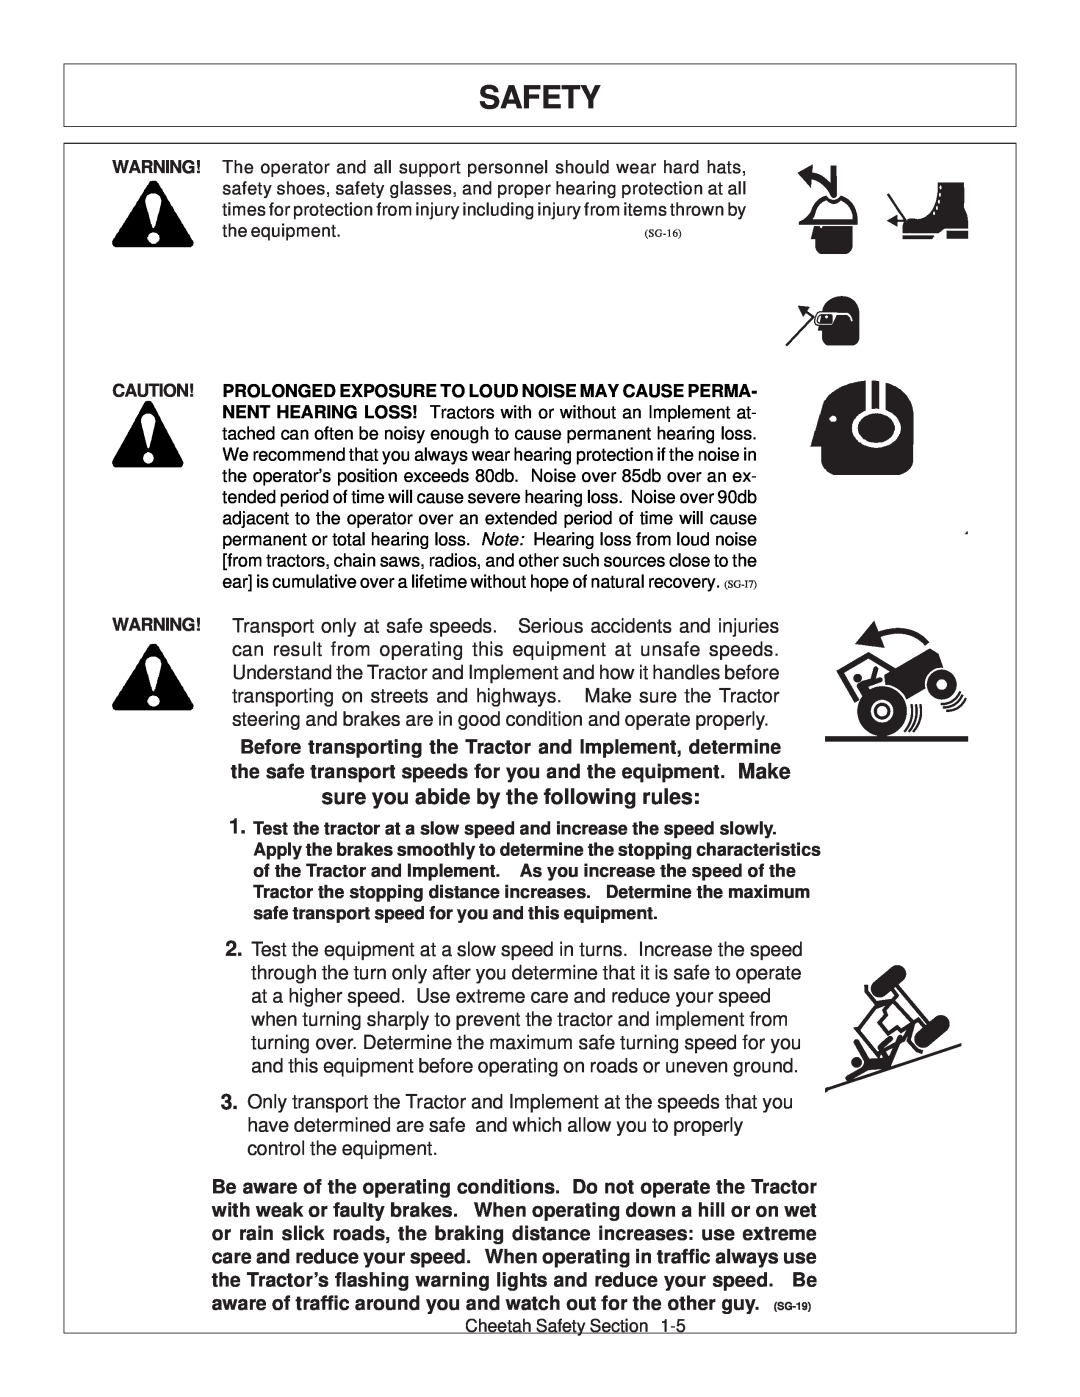 Tiger Products Co., Ltd JD 5093E, JD 5101E, JD 5083E manual Safety, sure you abide by the following rules 